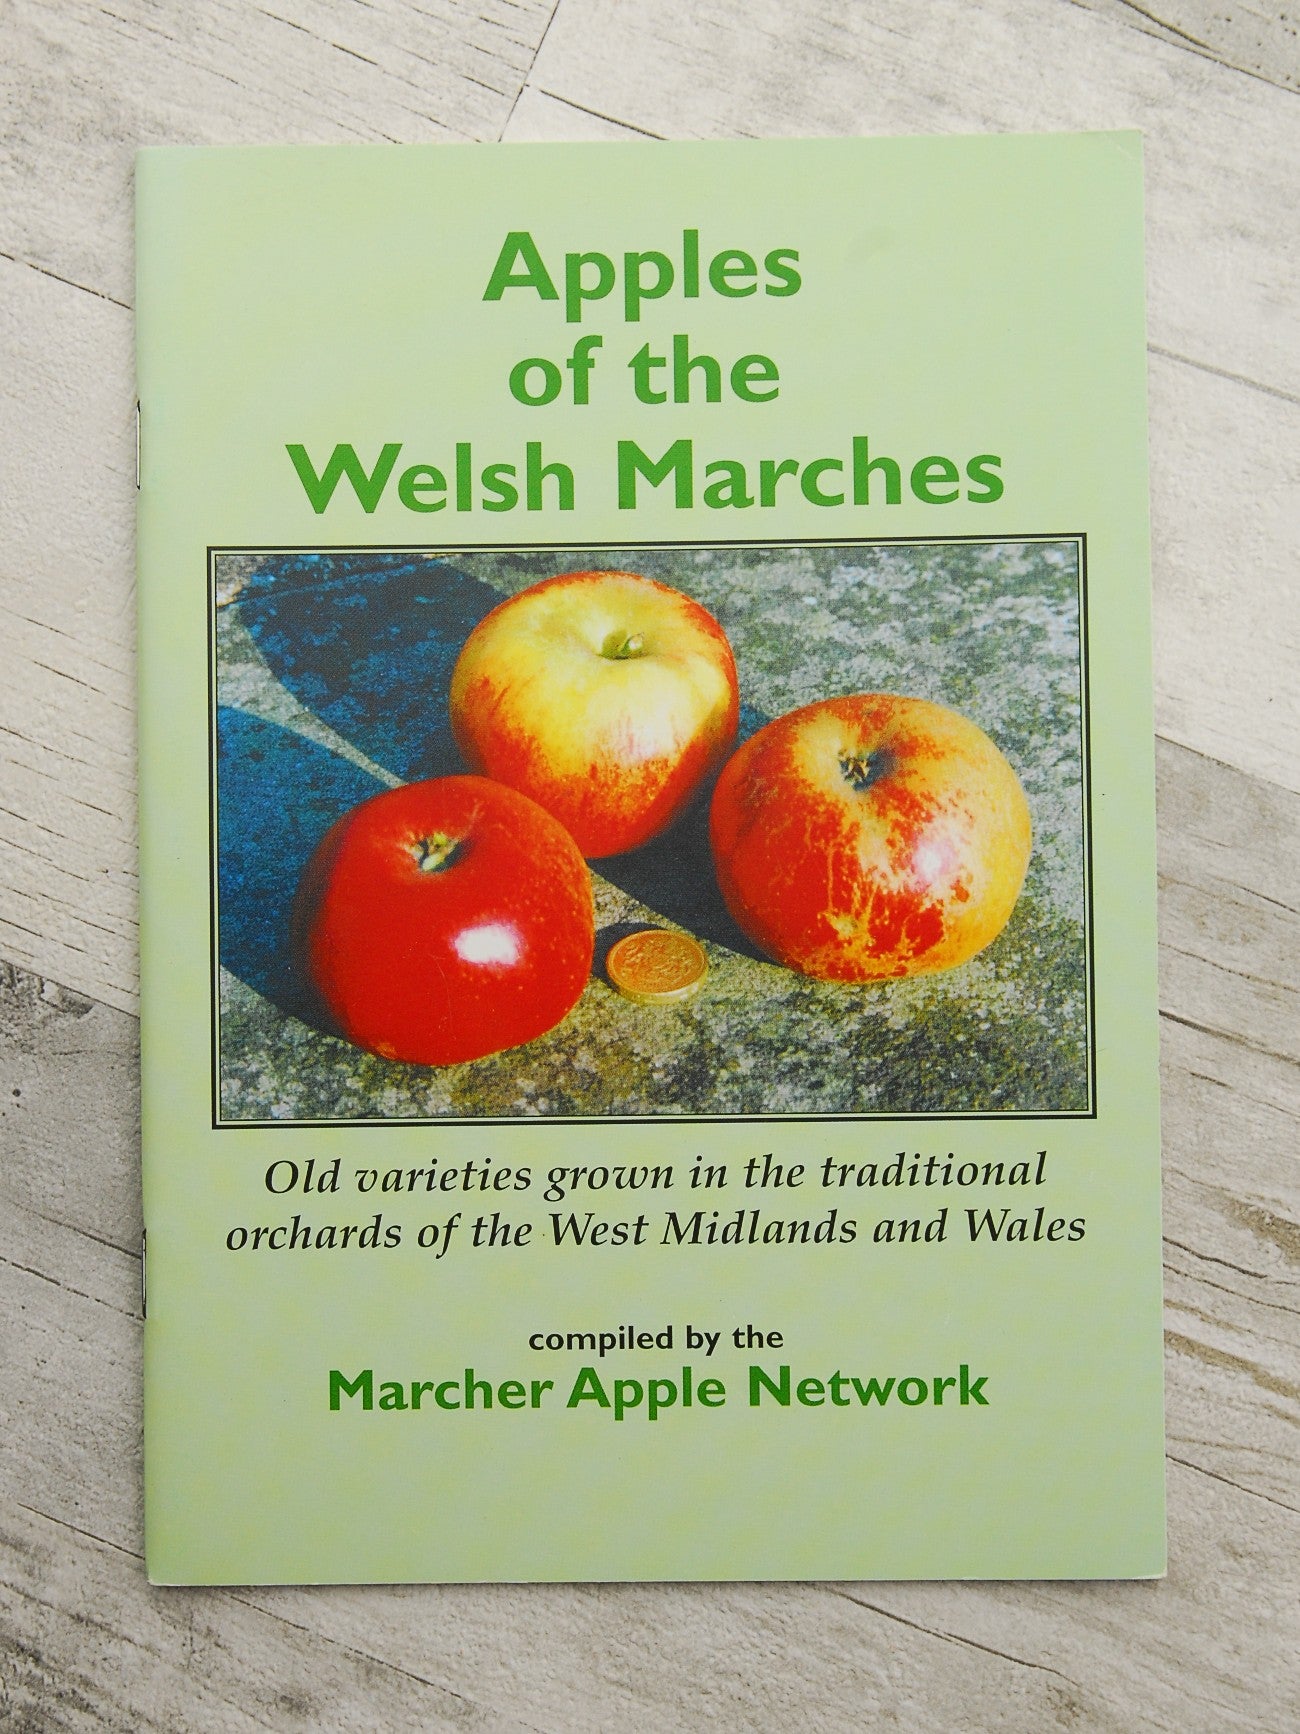 Apples of the Welsh Marches